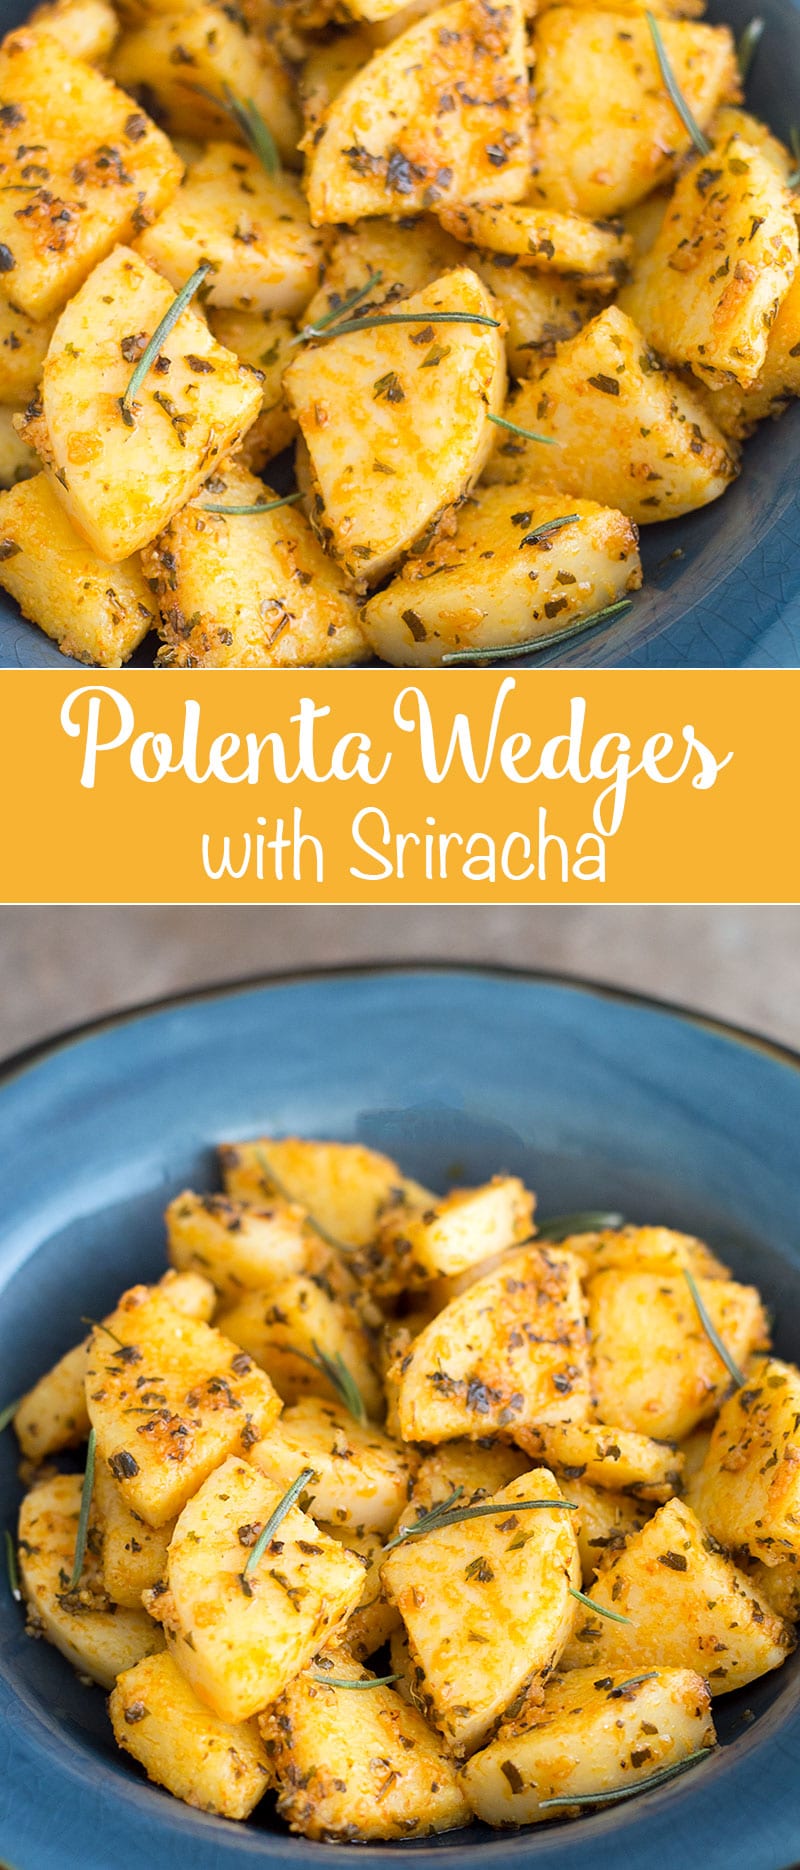 Polenta wedges quickly stir fried in dried spices and topped with Sriracha sauce. These polenta wedges make for a great snack or a side dish